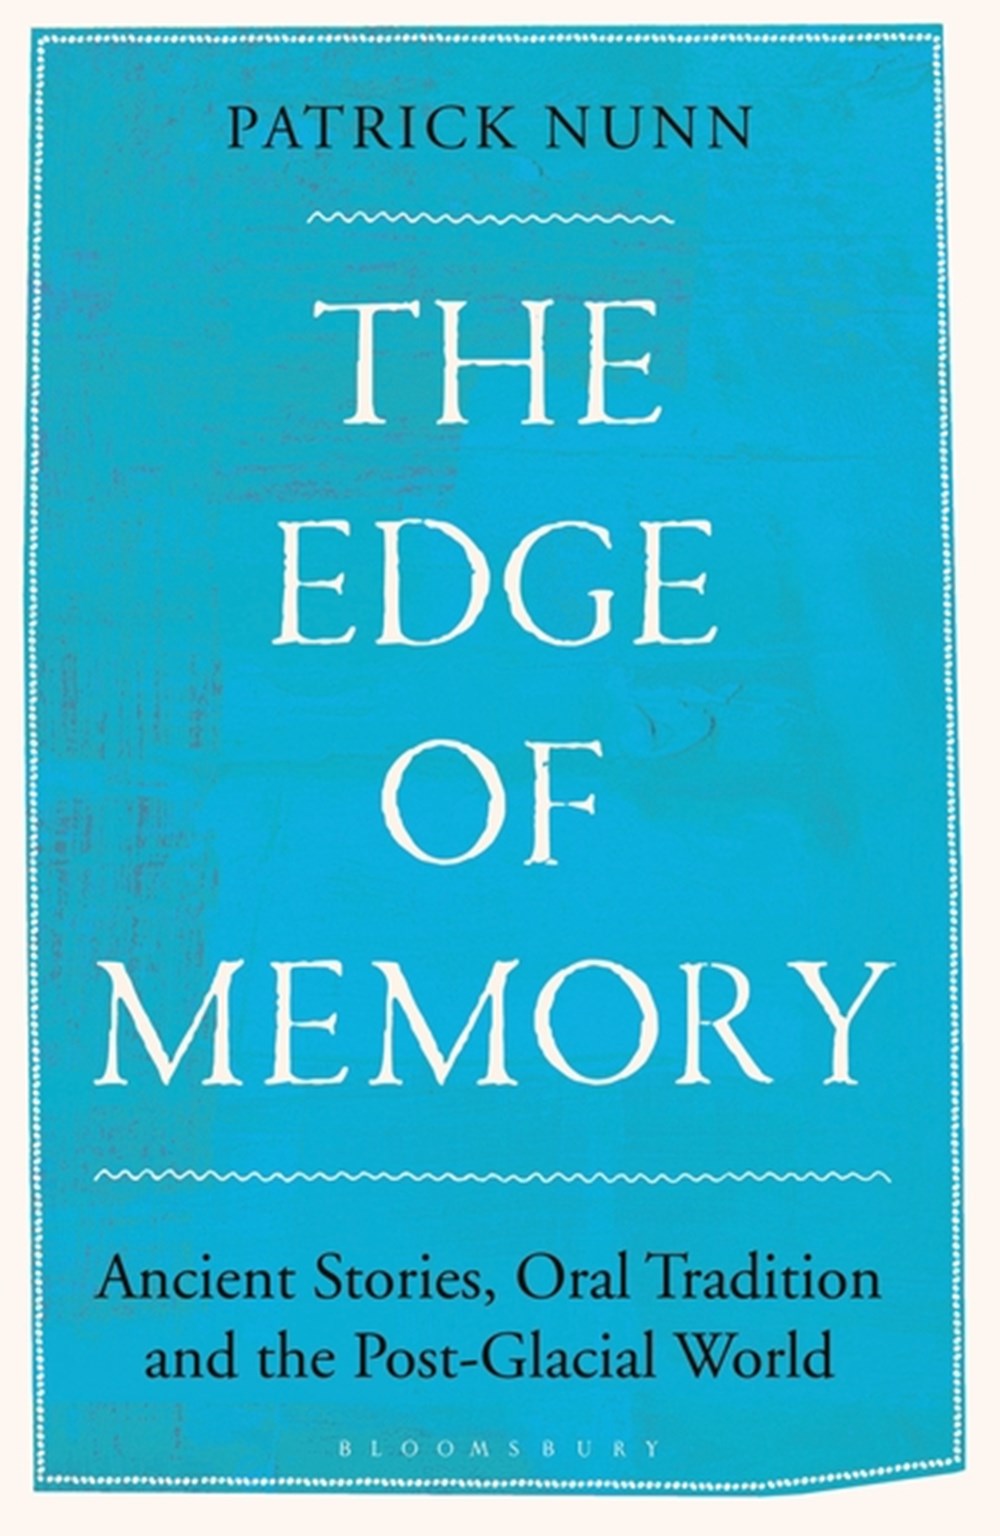 Edge of Memory: Ancient Stories, Oral Tradition and the Post-Glacial World